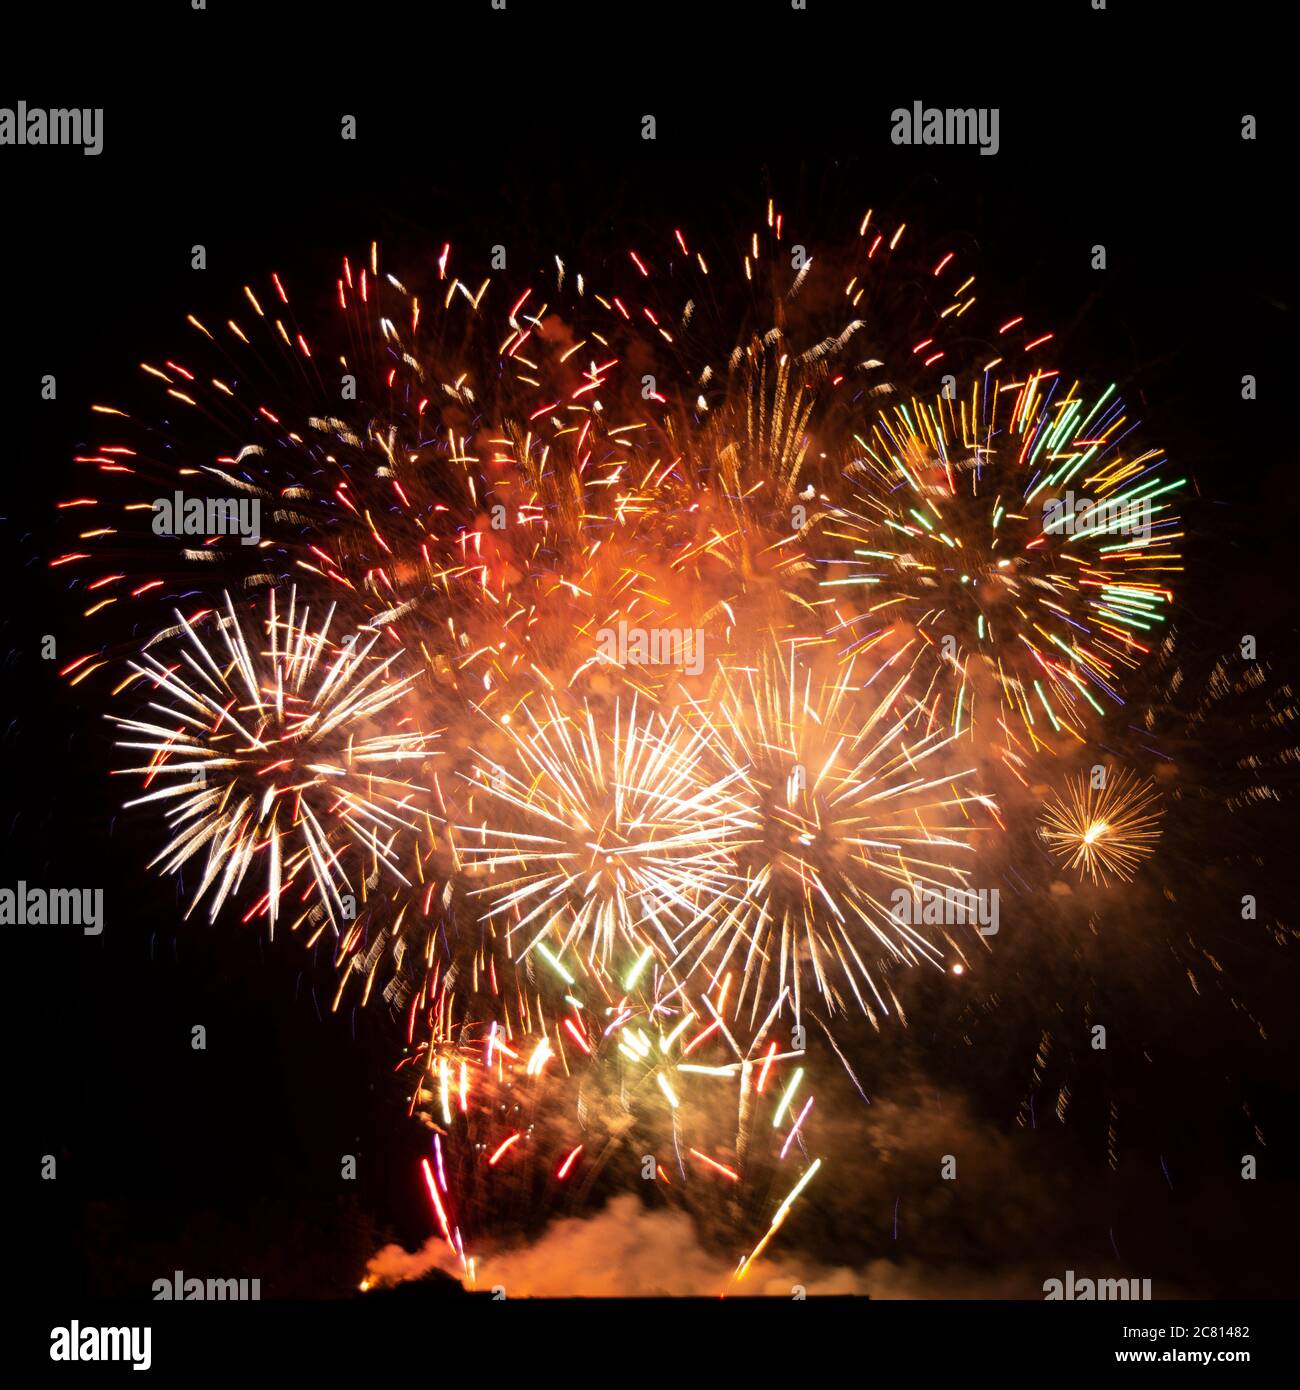 Fireworks illuminate the 14th of july, bastille day in France Stock Photo